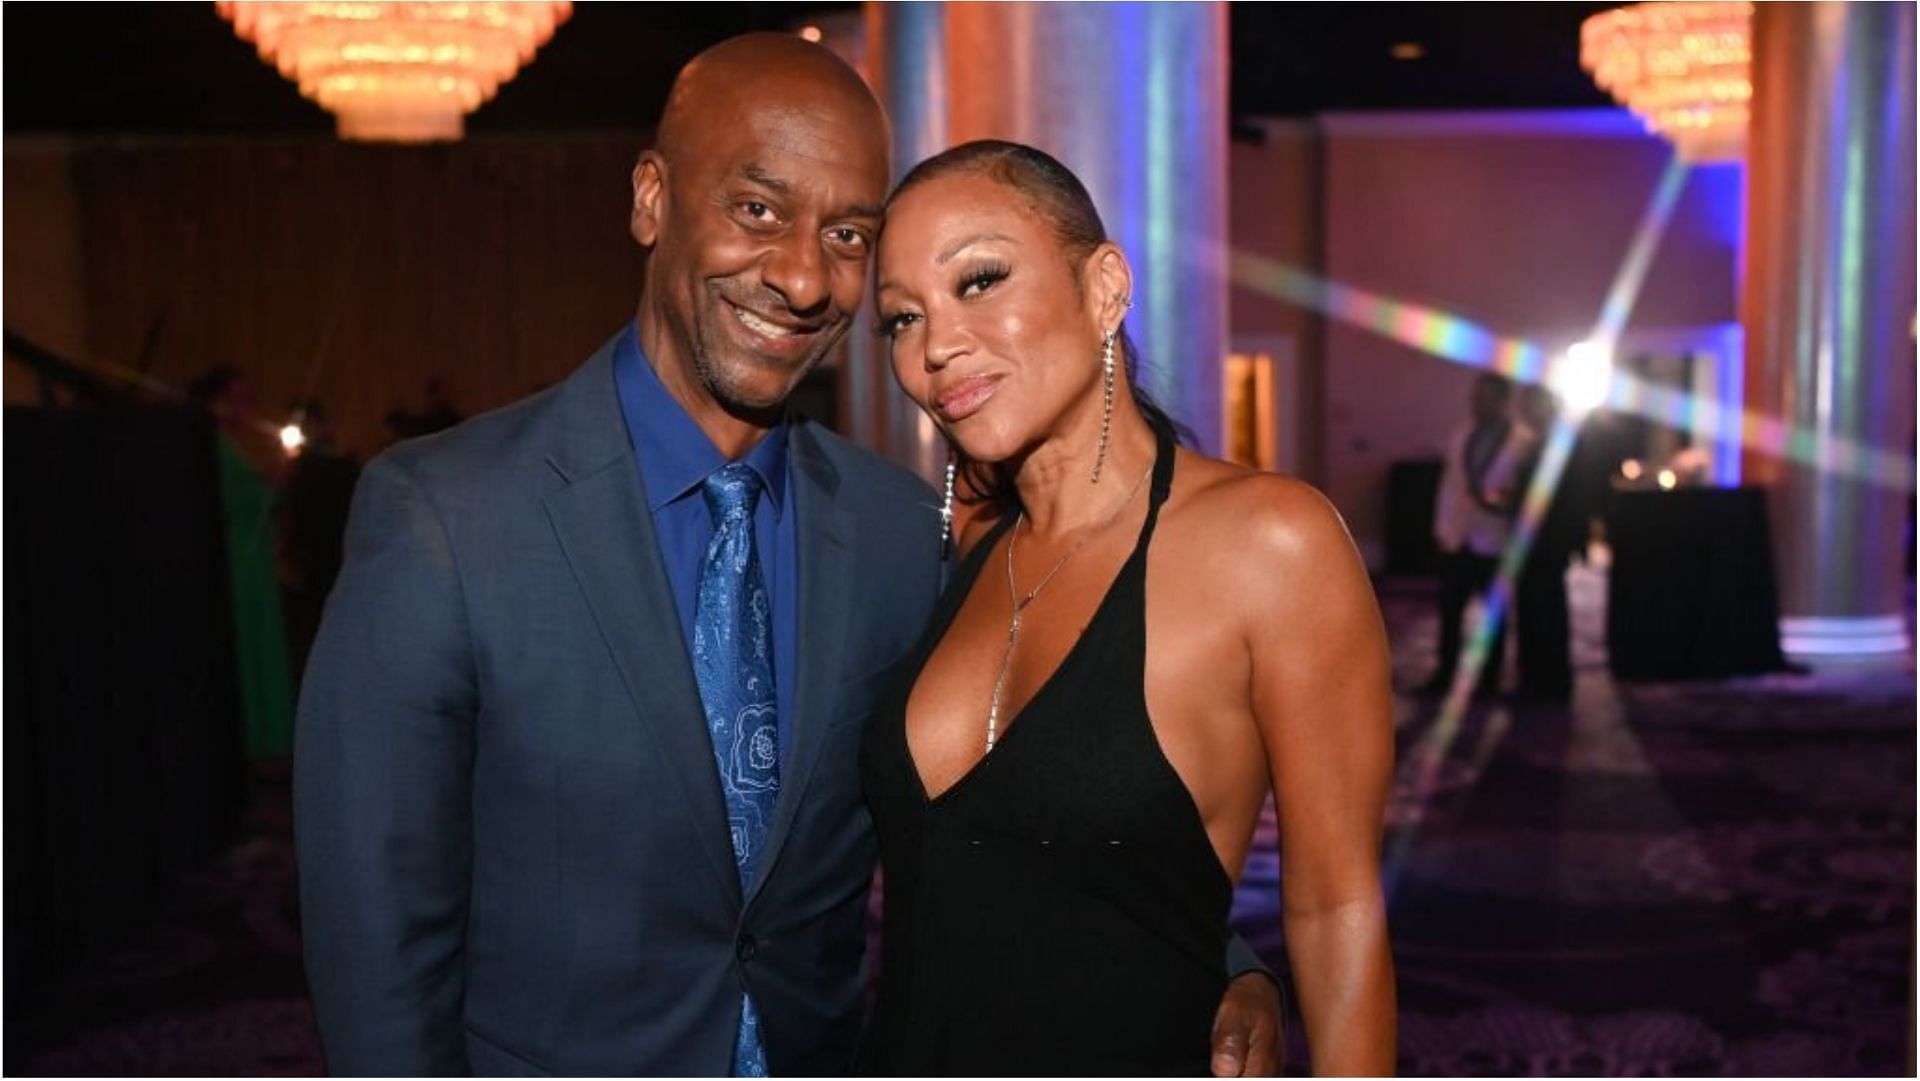 Chante Moore and Stephen Hill recently got married (Image via Prince Williams/Getty Images)